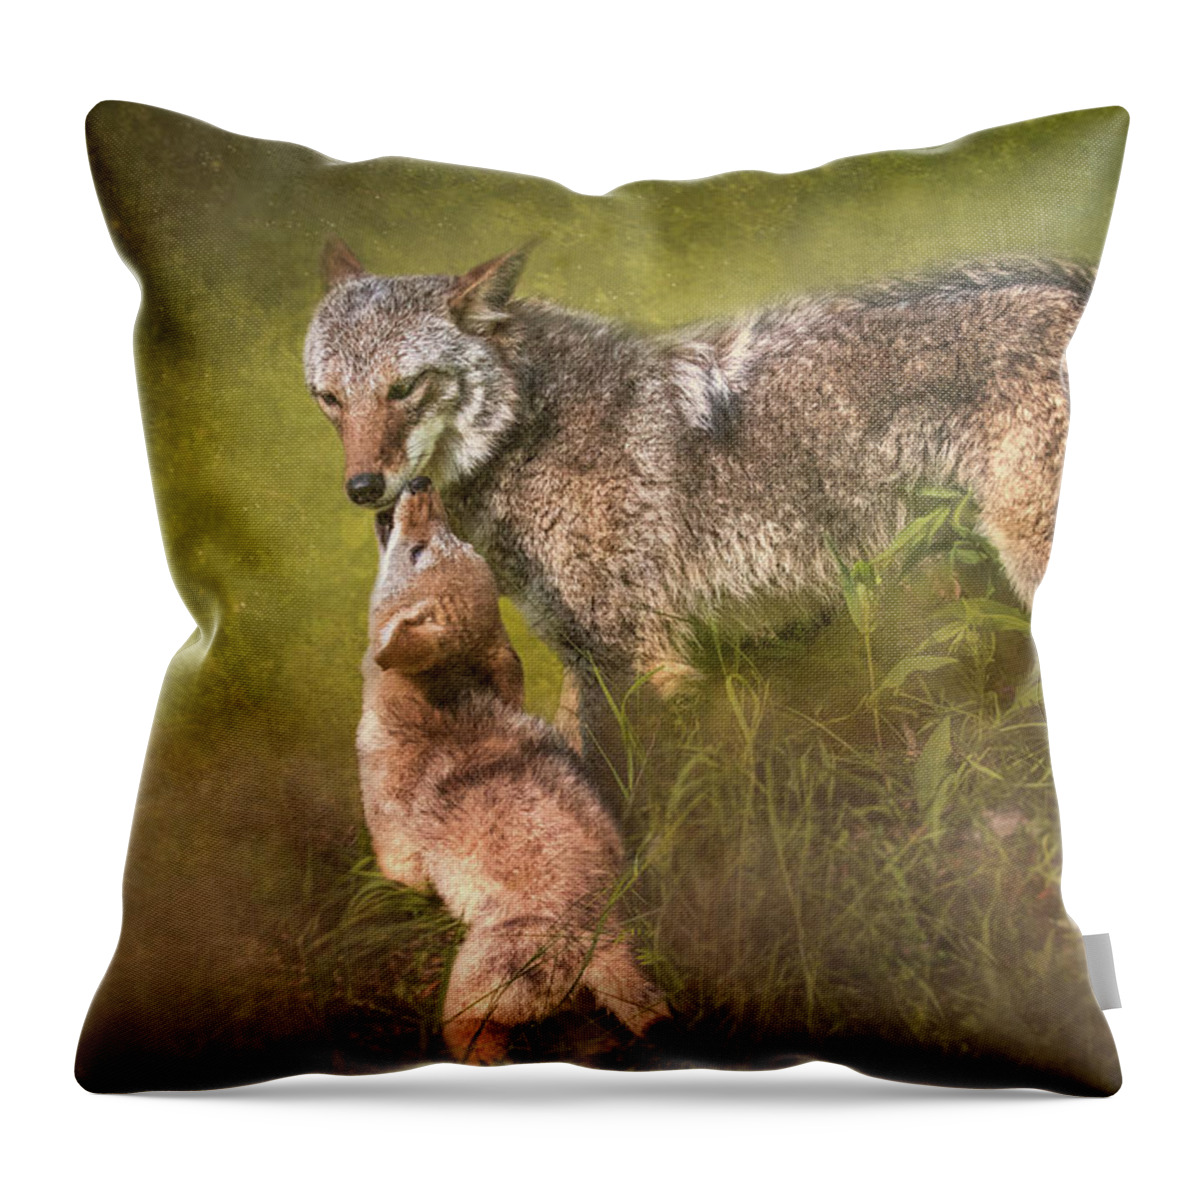 Coyote Throw Pillow featuring the digital art Tender Moment by Nicole Wilde